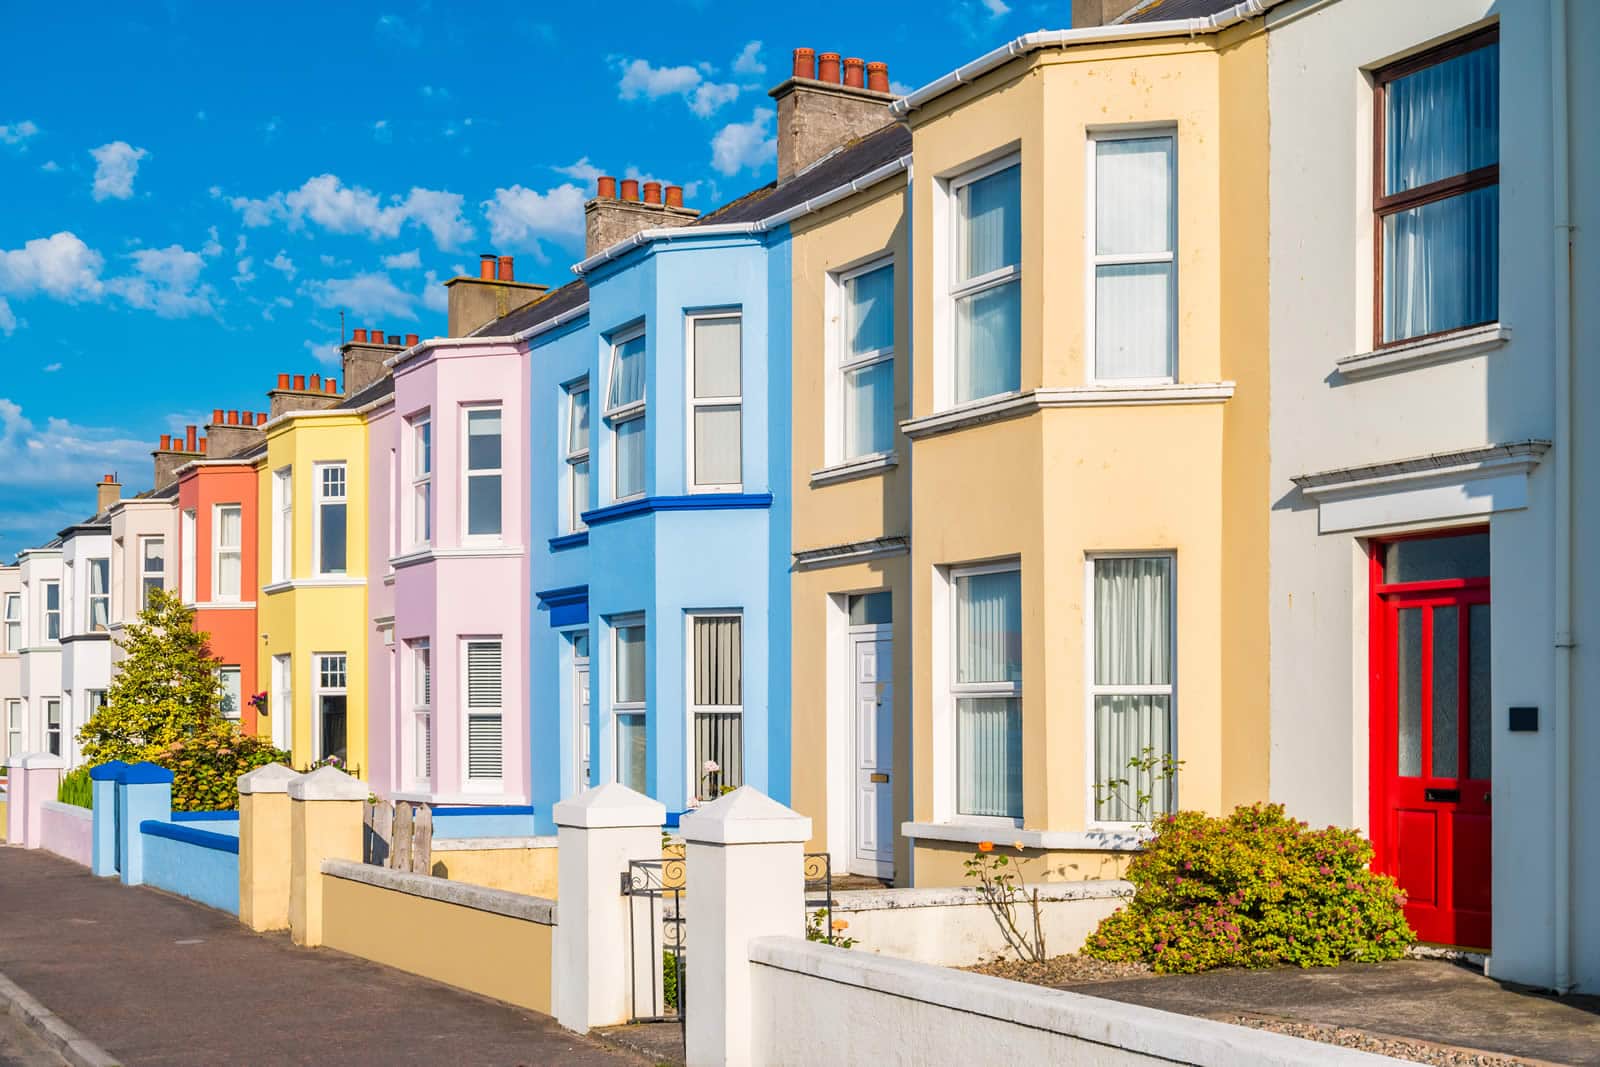 Colourful terraced townhouse properties on a sunny day